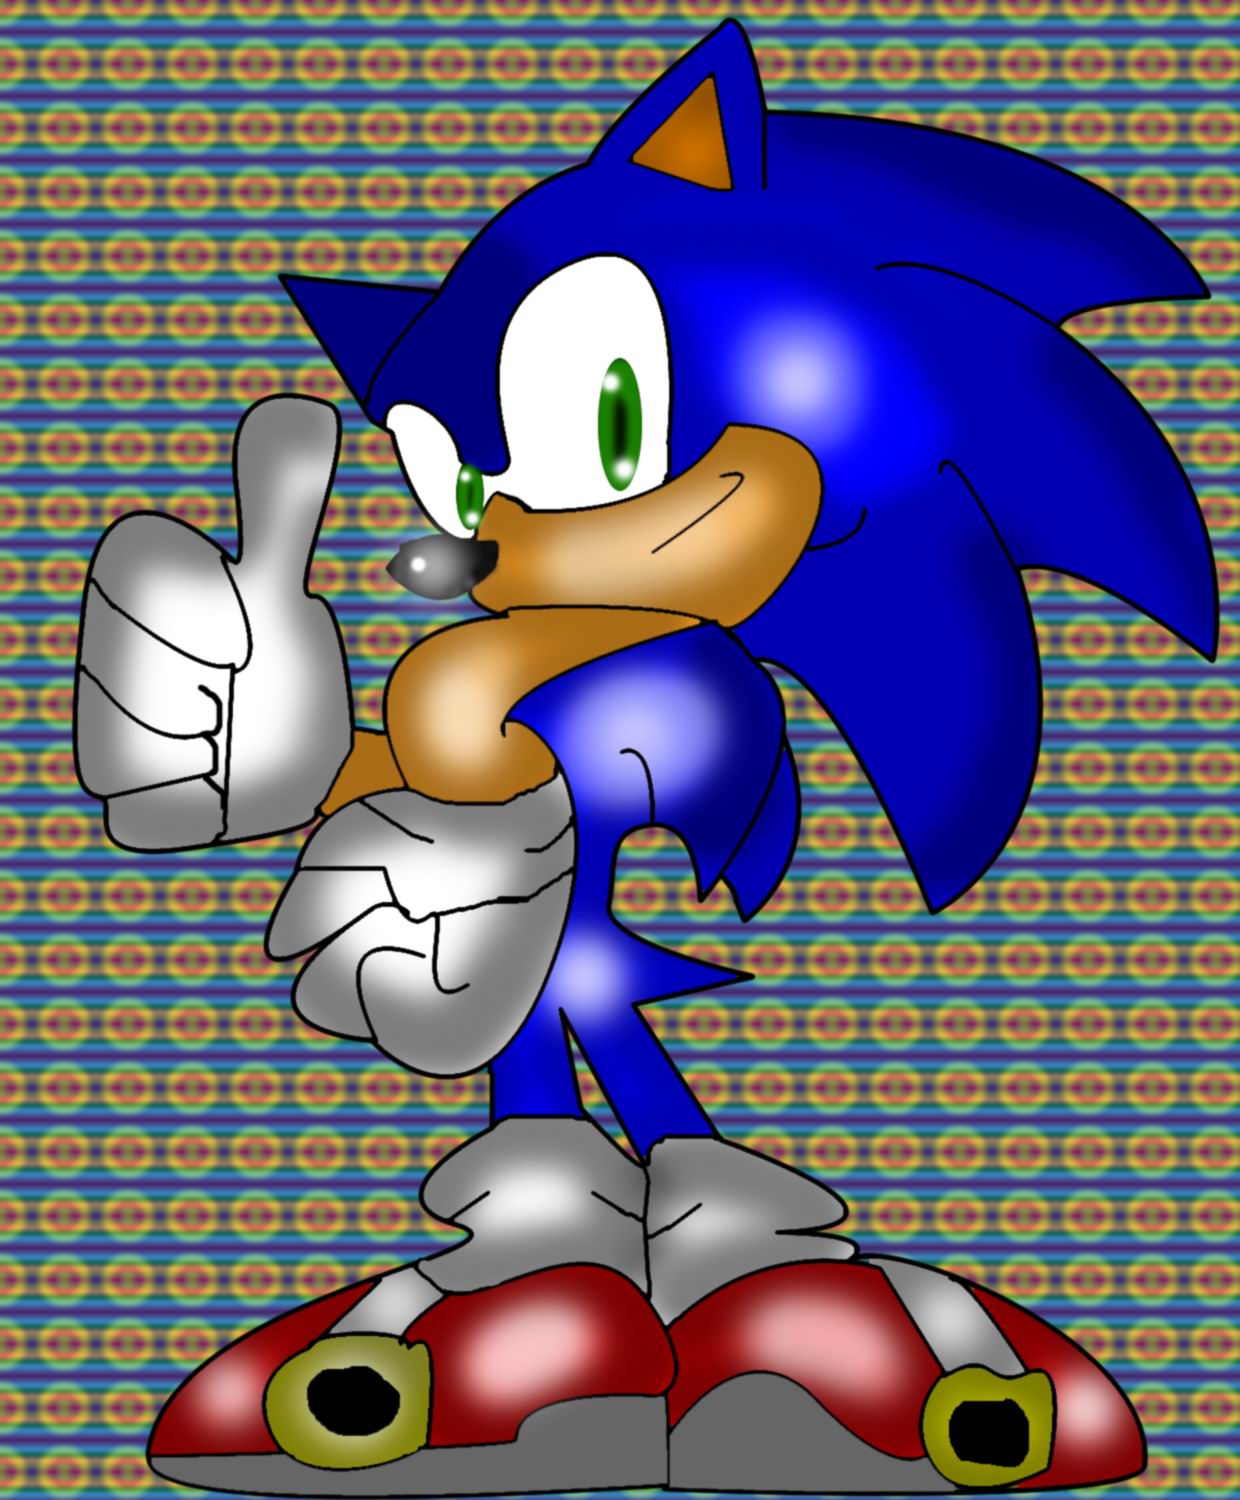 Sonic The Hedgehog by Nicky